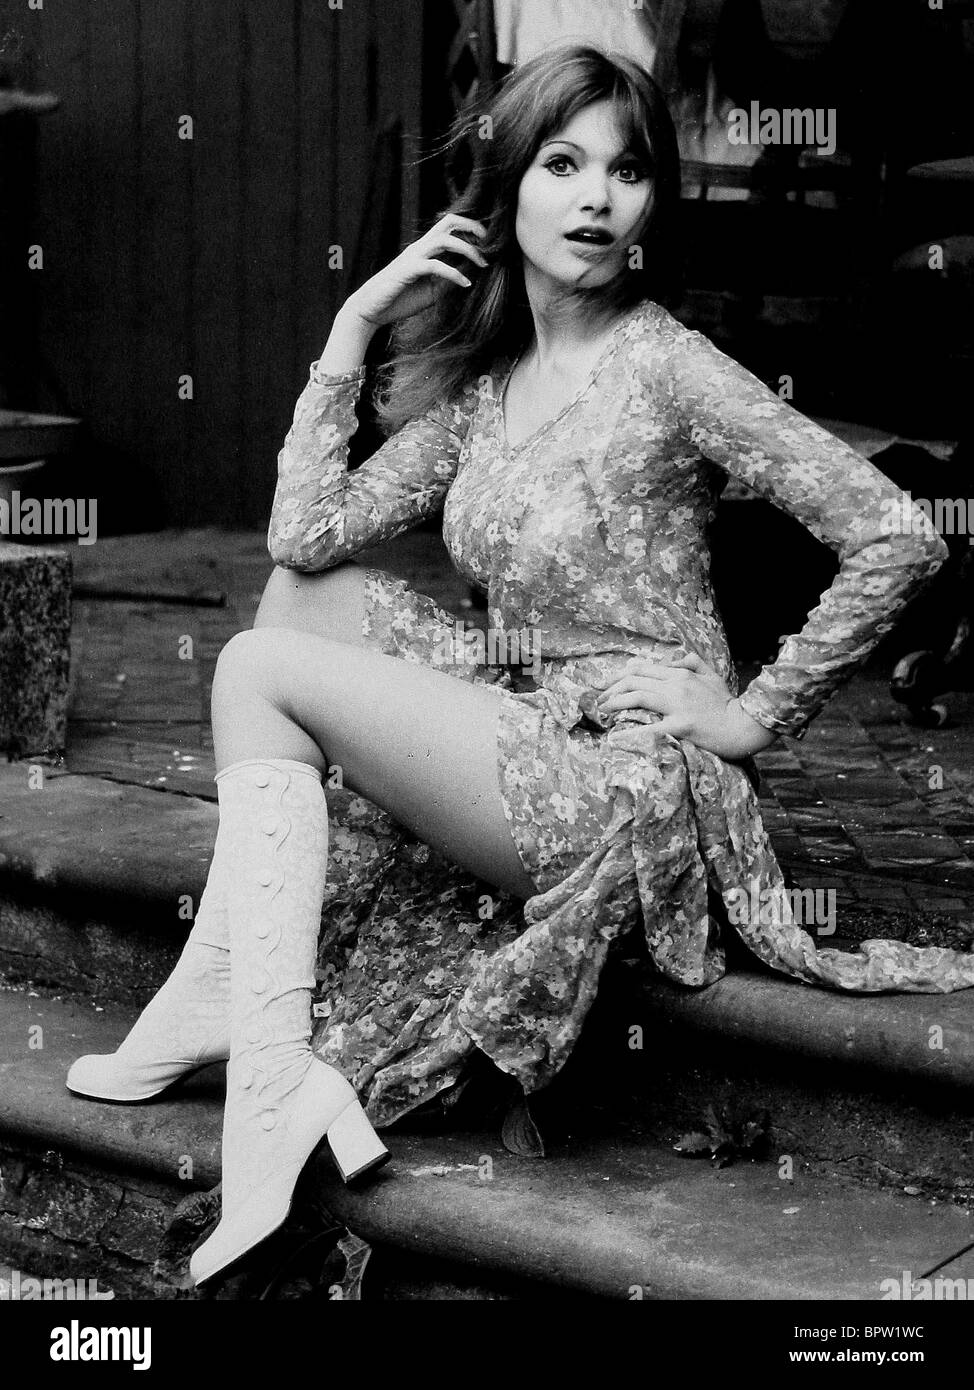 Madeline smith images